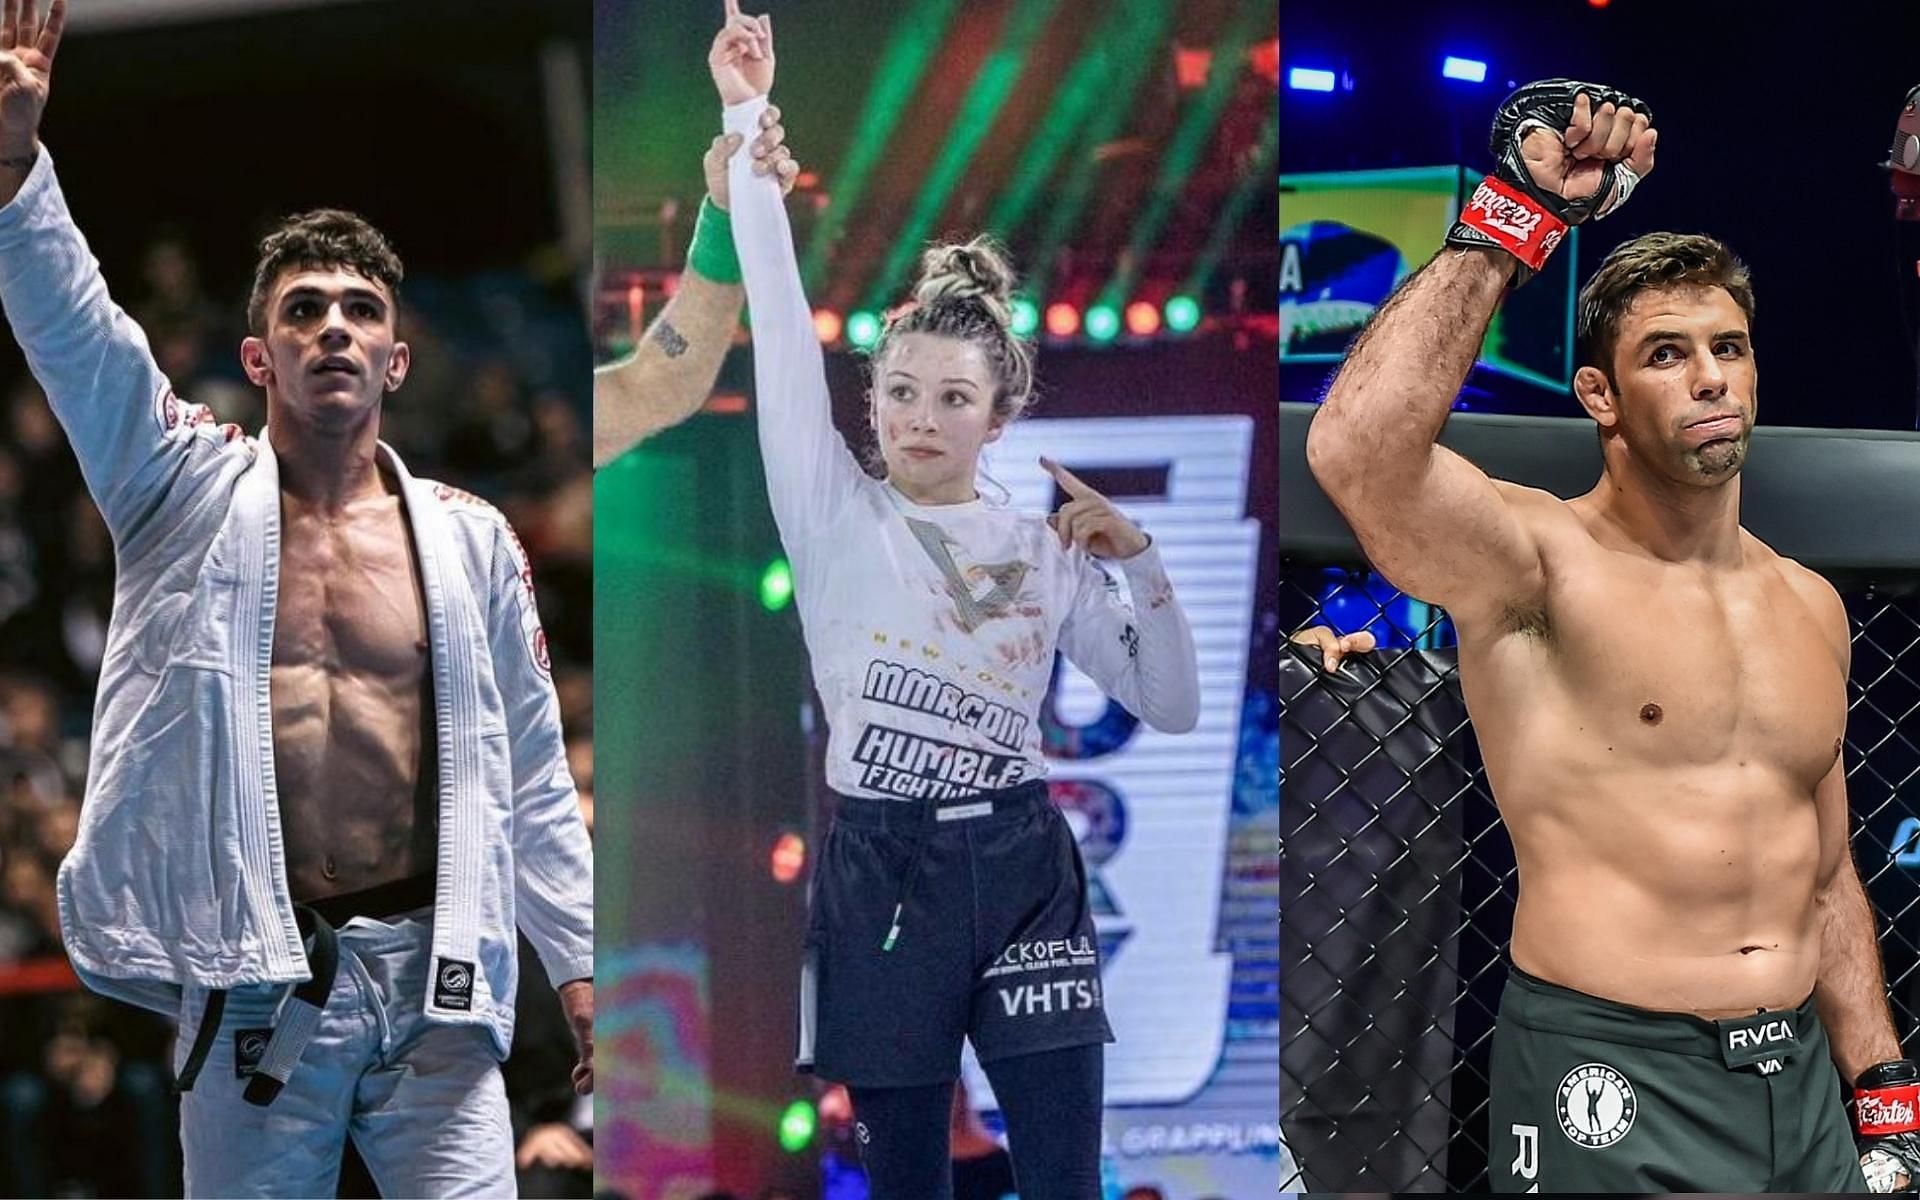 (From left to right) ONE Championship&#039;s deadliest grapplers today: Mikey Musumeci, Danielle Kelly, and Marcus &#039;Buchecha&#039; Almeida. (Images courtesy: @mikeymusumeci and @daniellekellybjj on Instagram, ONE Championship)